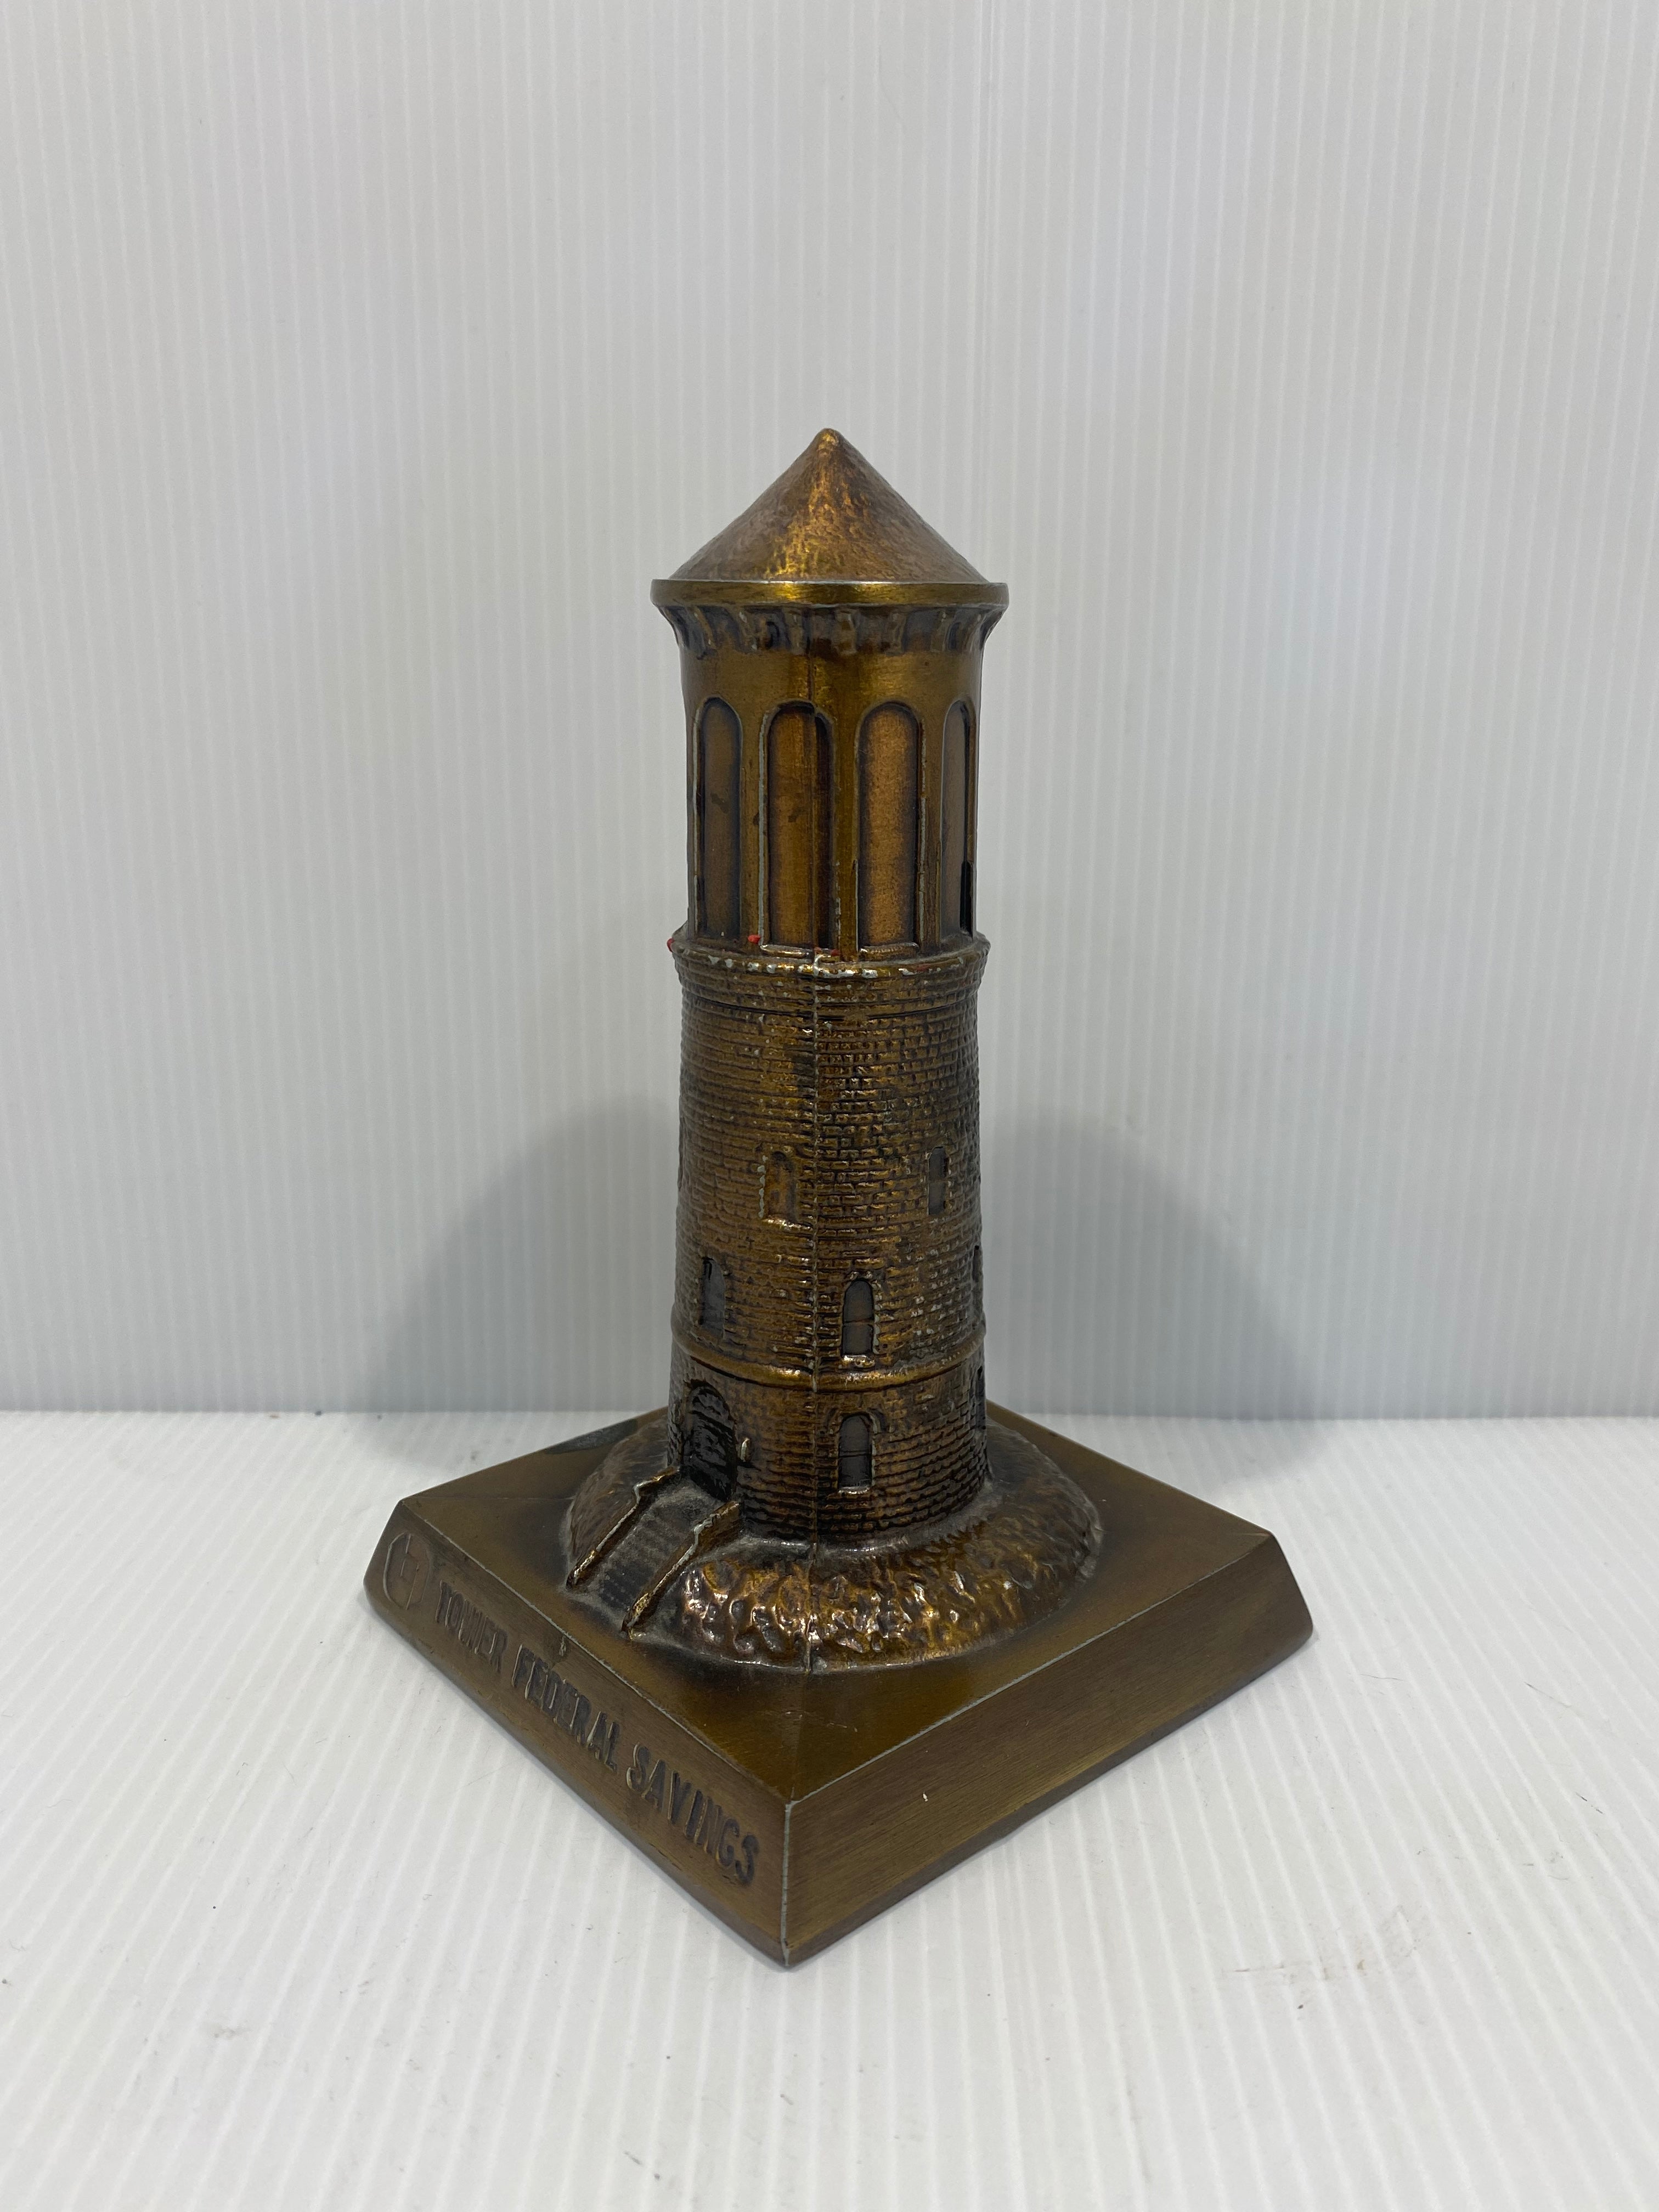 Vintage brass Tower Federal Savings coin bank made by Banthrico. 1964